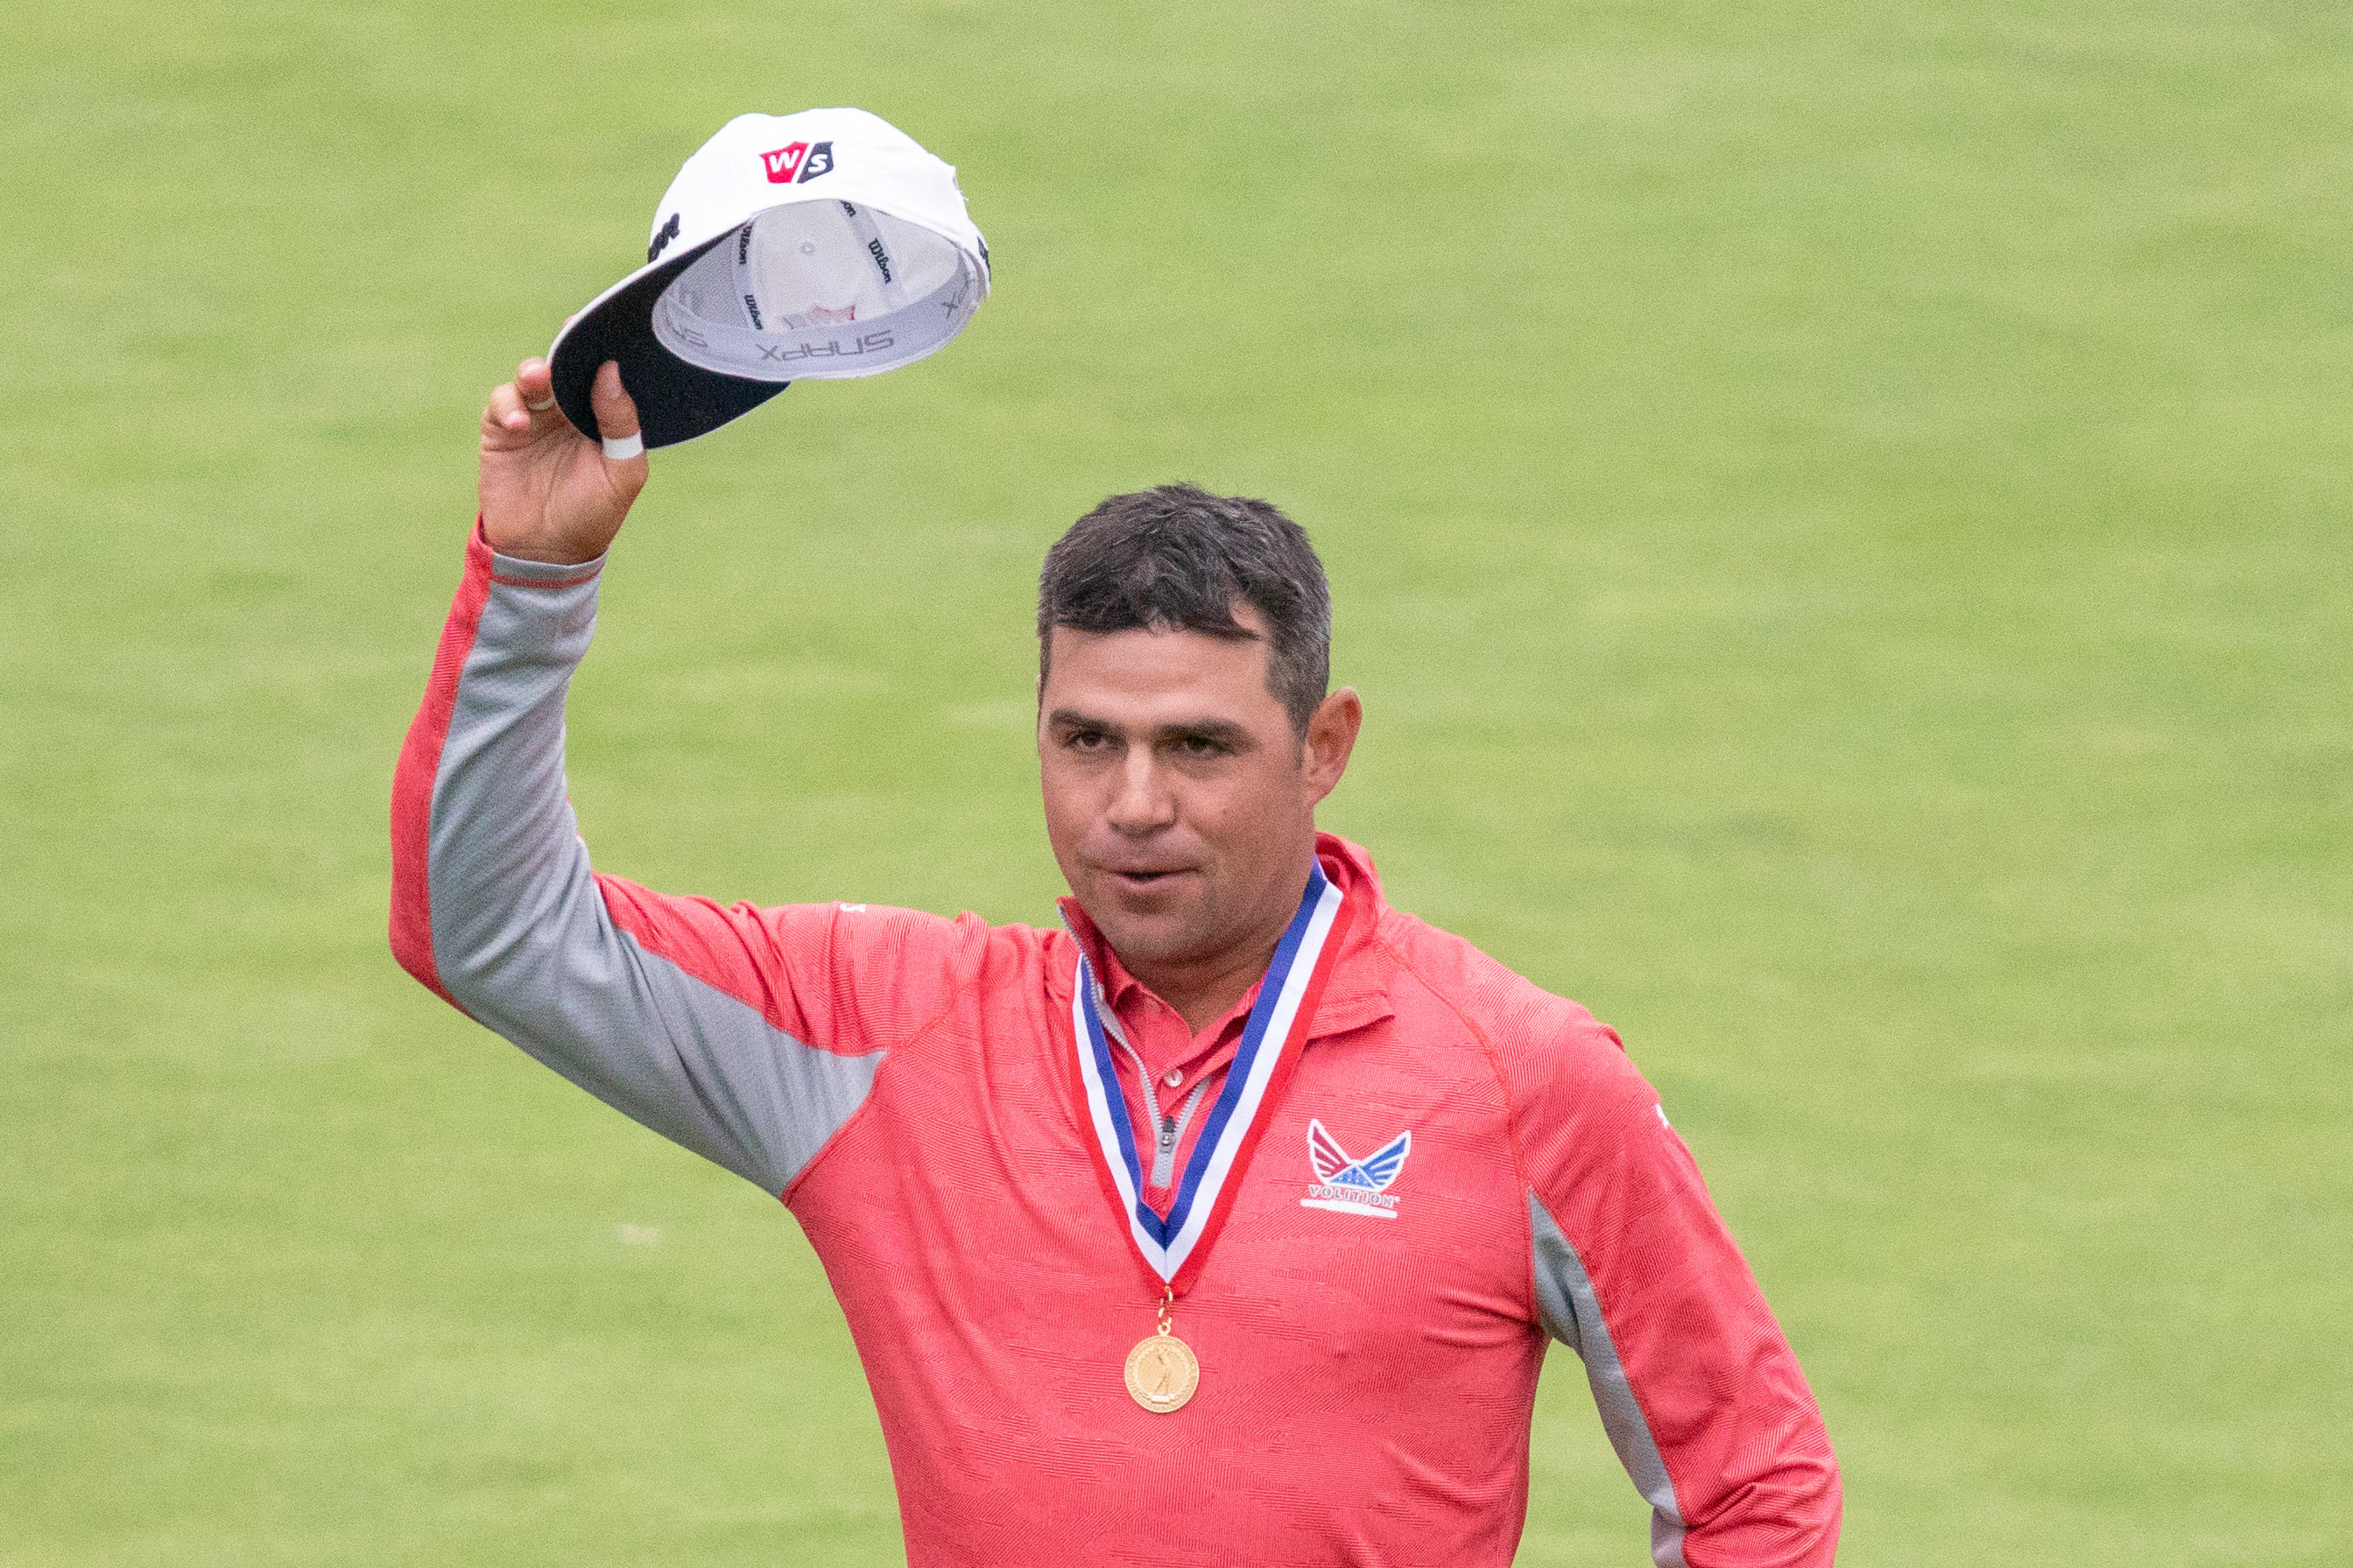 Gary Woodland after being presented the Jack Nicklaus Medal for winning the 2019 U.S. Open during the final round of the 2019 U.S. Open golf tournament at Pebble Beach Golf Links.